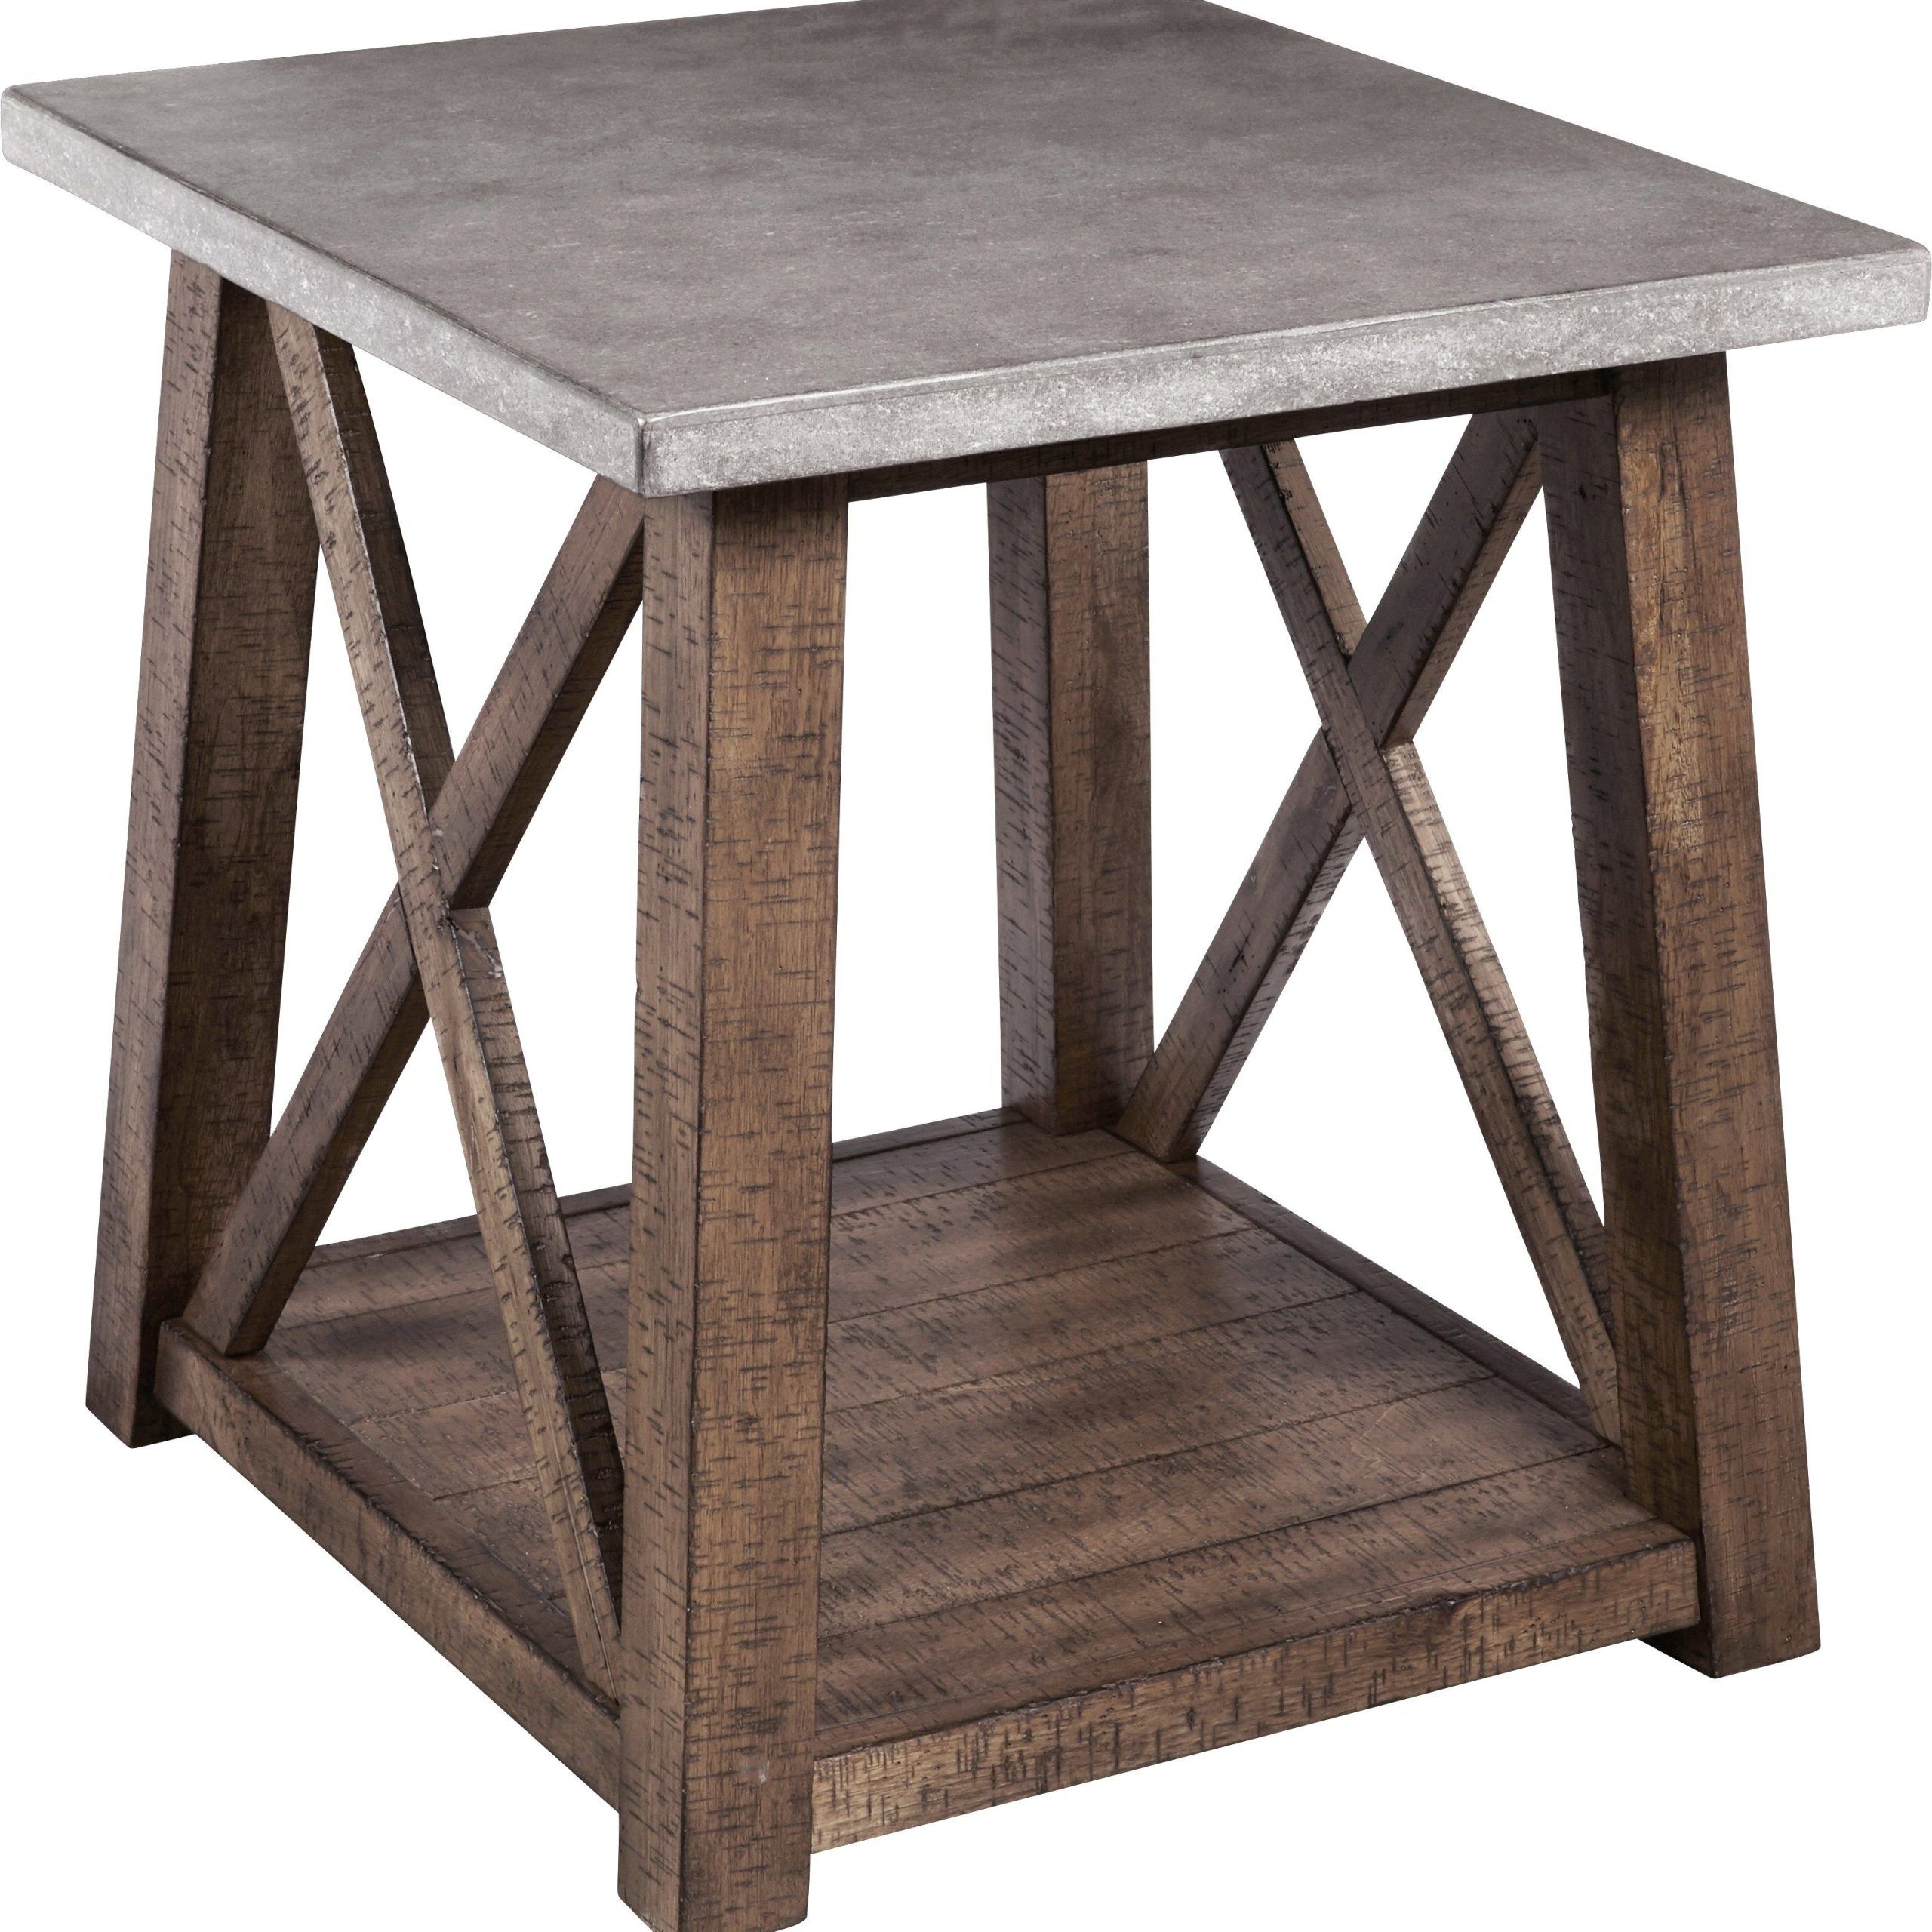 Wimberley Gray End Table .299.99. 22w X 24d X 24h (View 19 of 20)